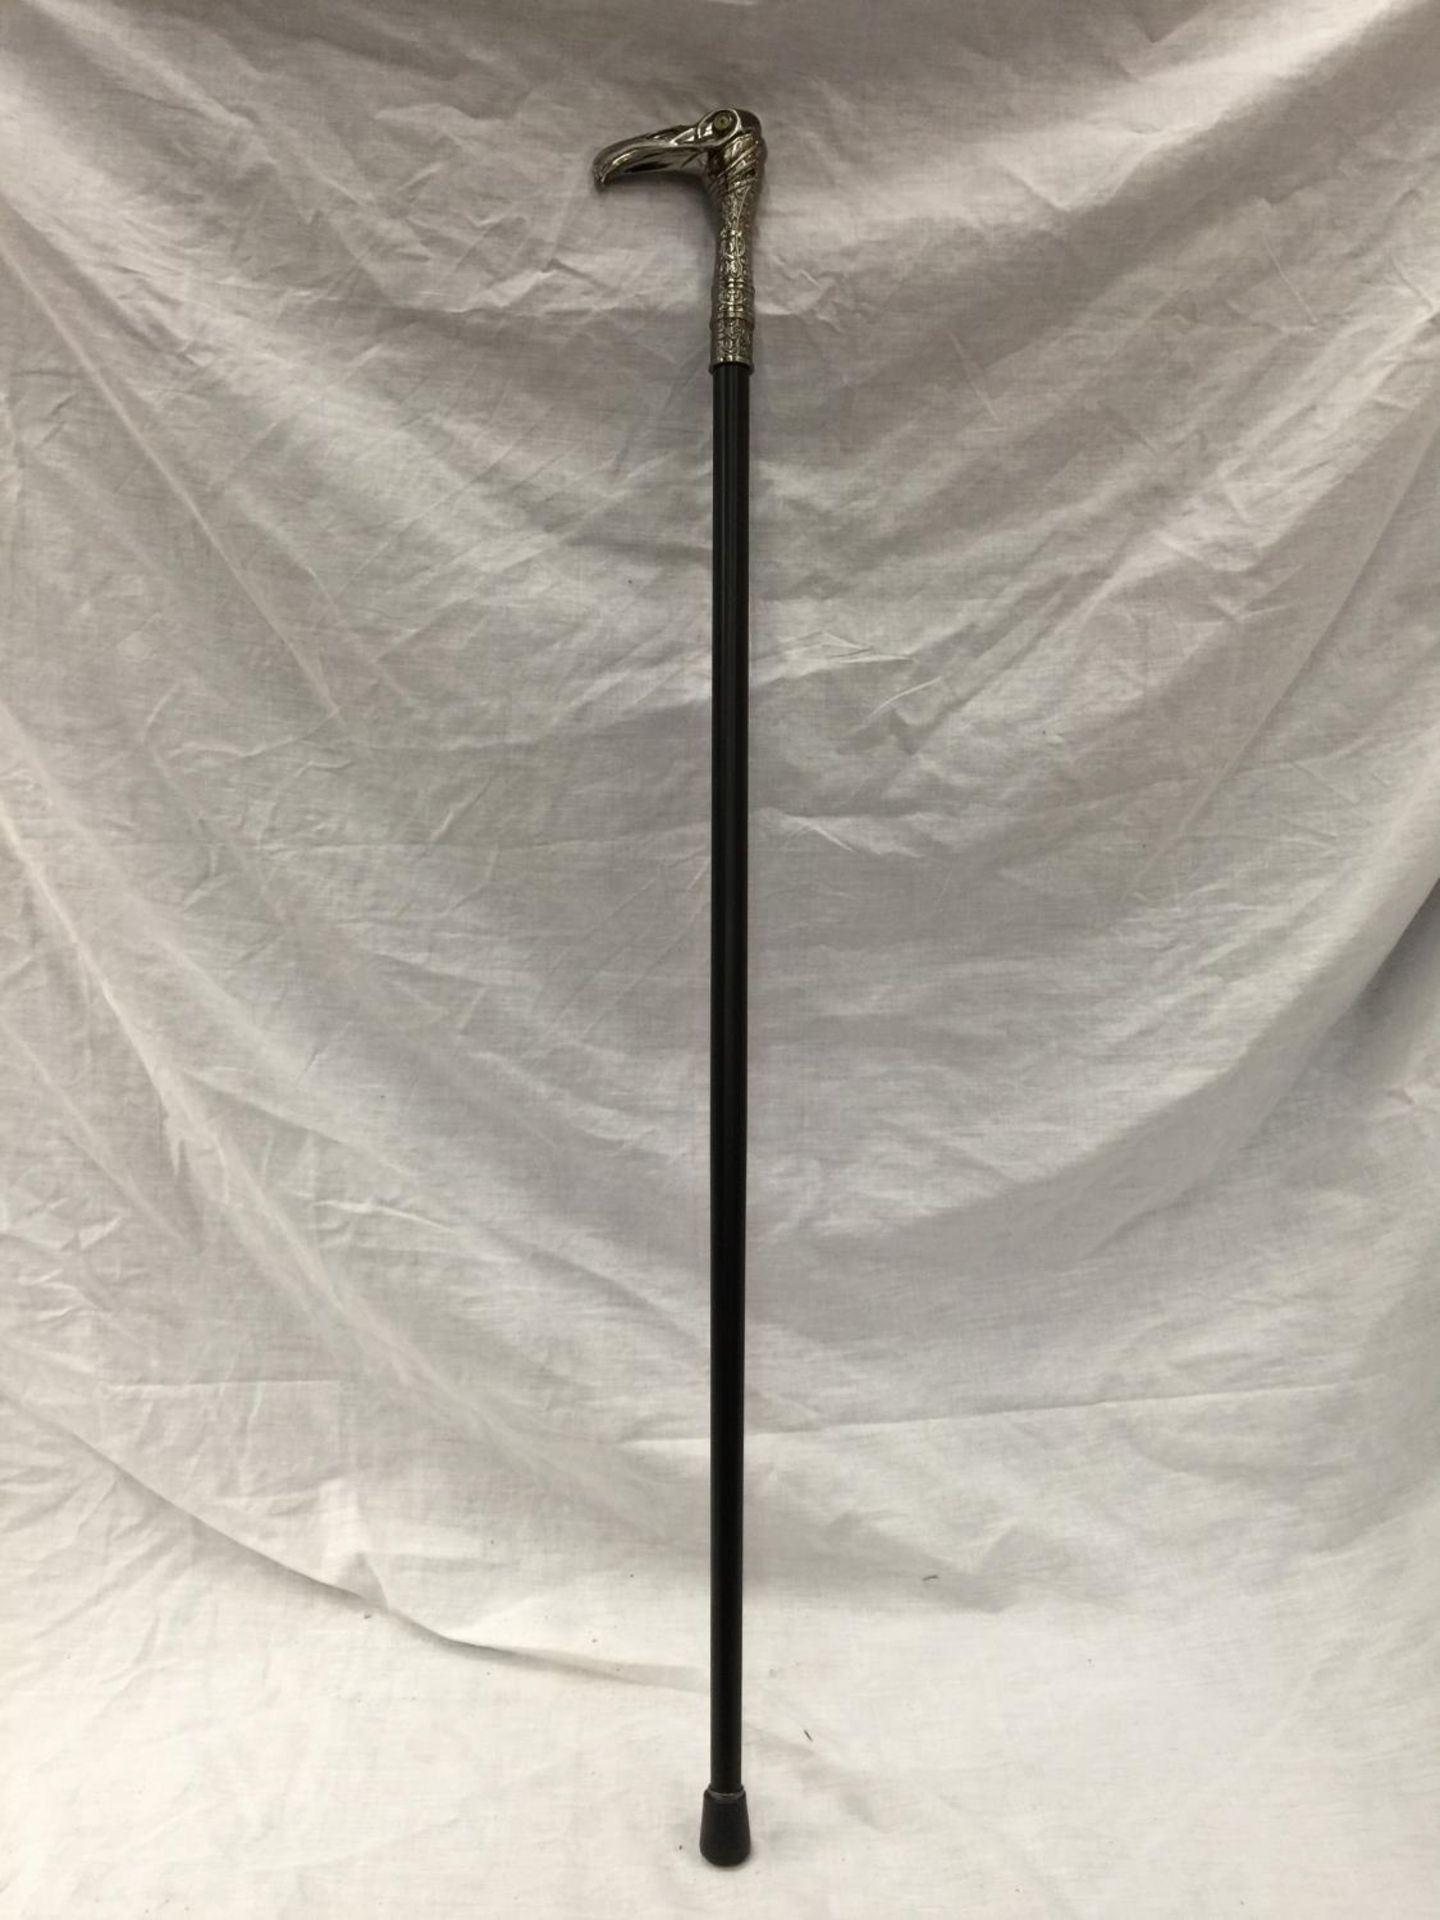 A WALKING STICK WITH AN EAGLES HEAD HANDLE